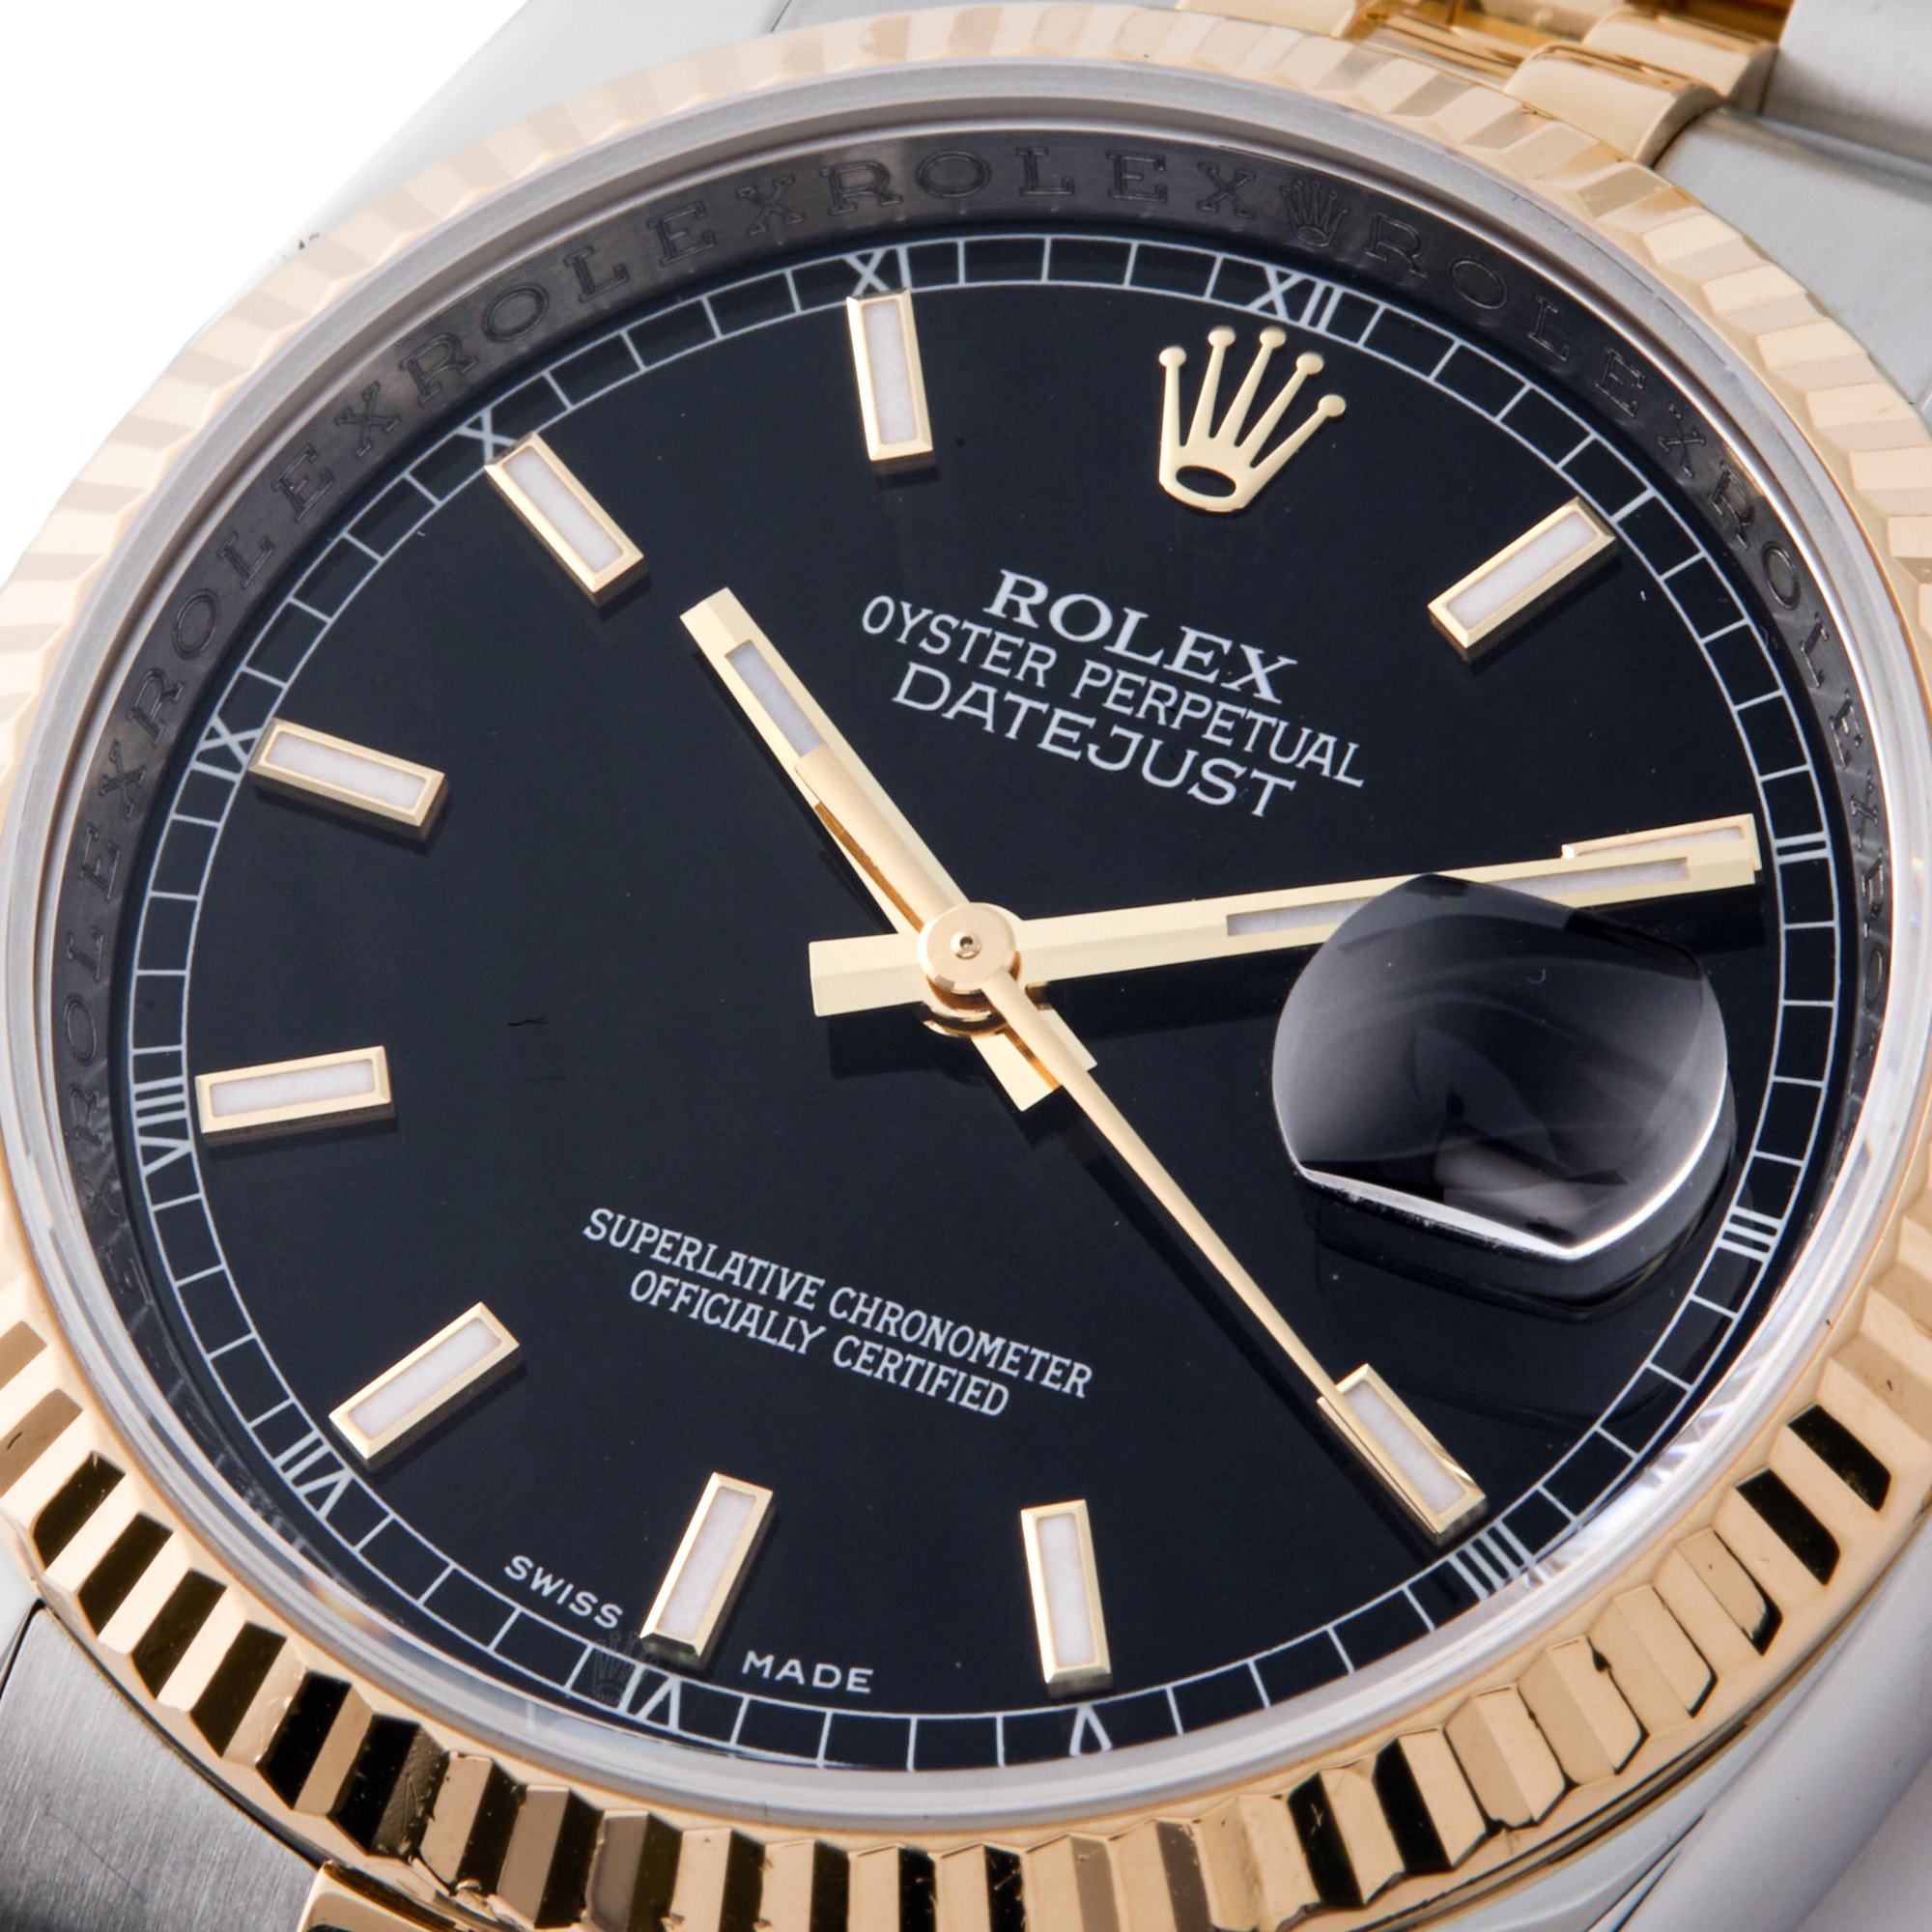 Rolex Datejust 36 Roulette Date Wheel Yellow Gold & Stainless Steel 116233